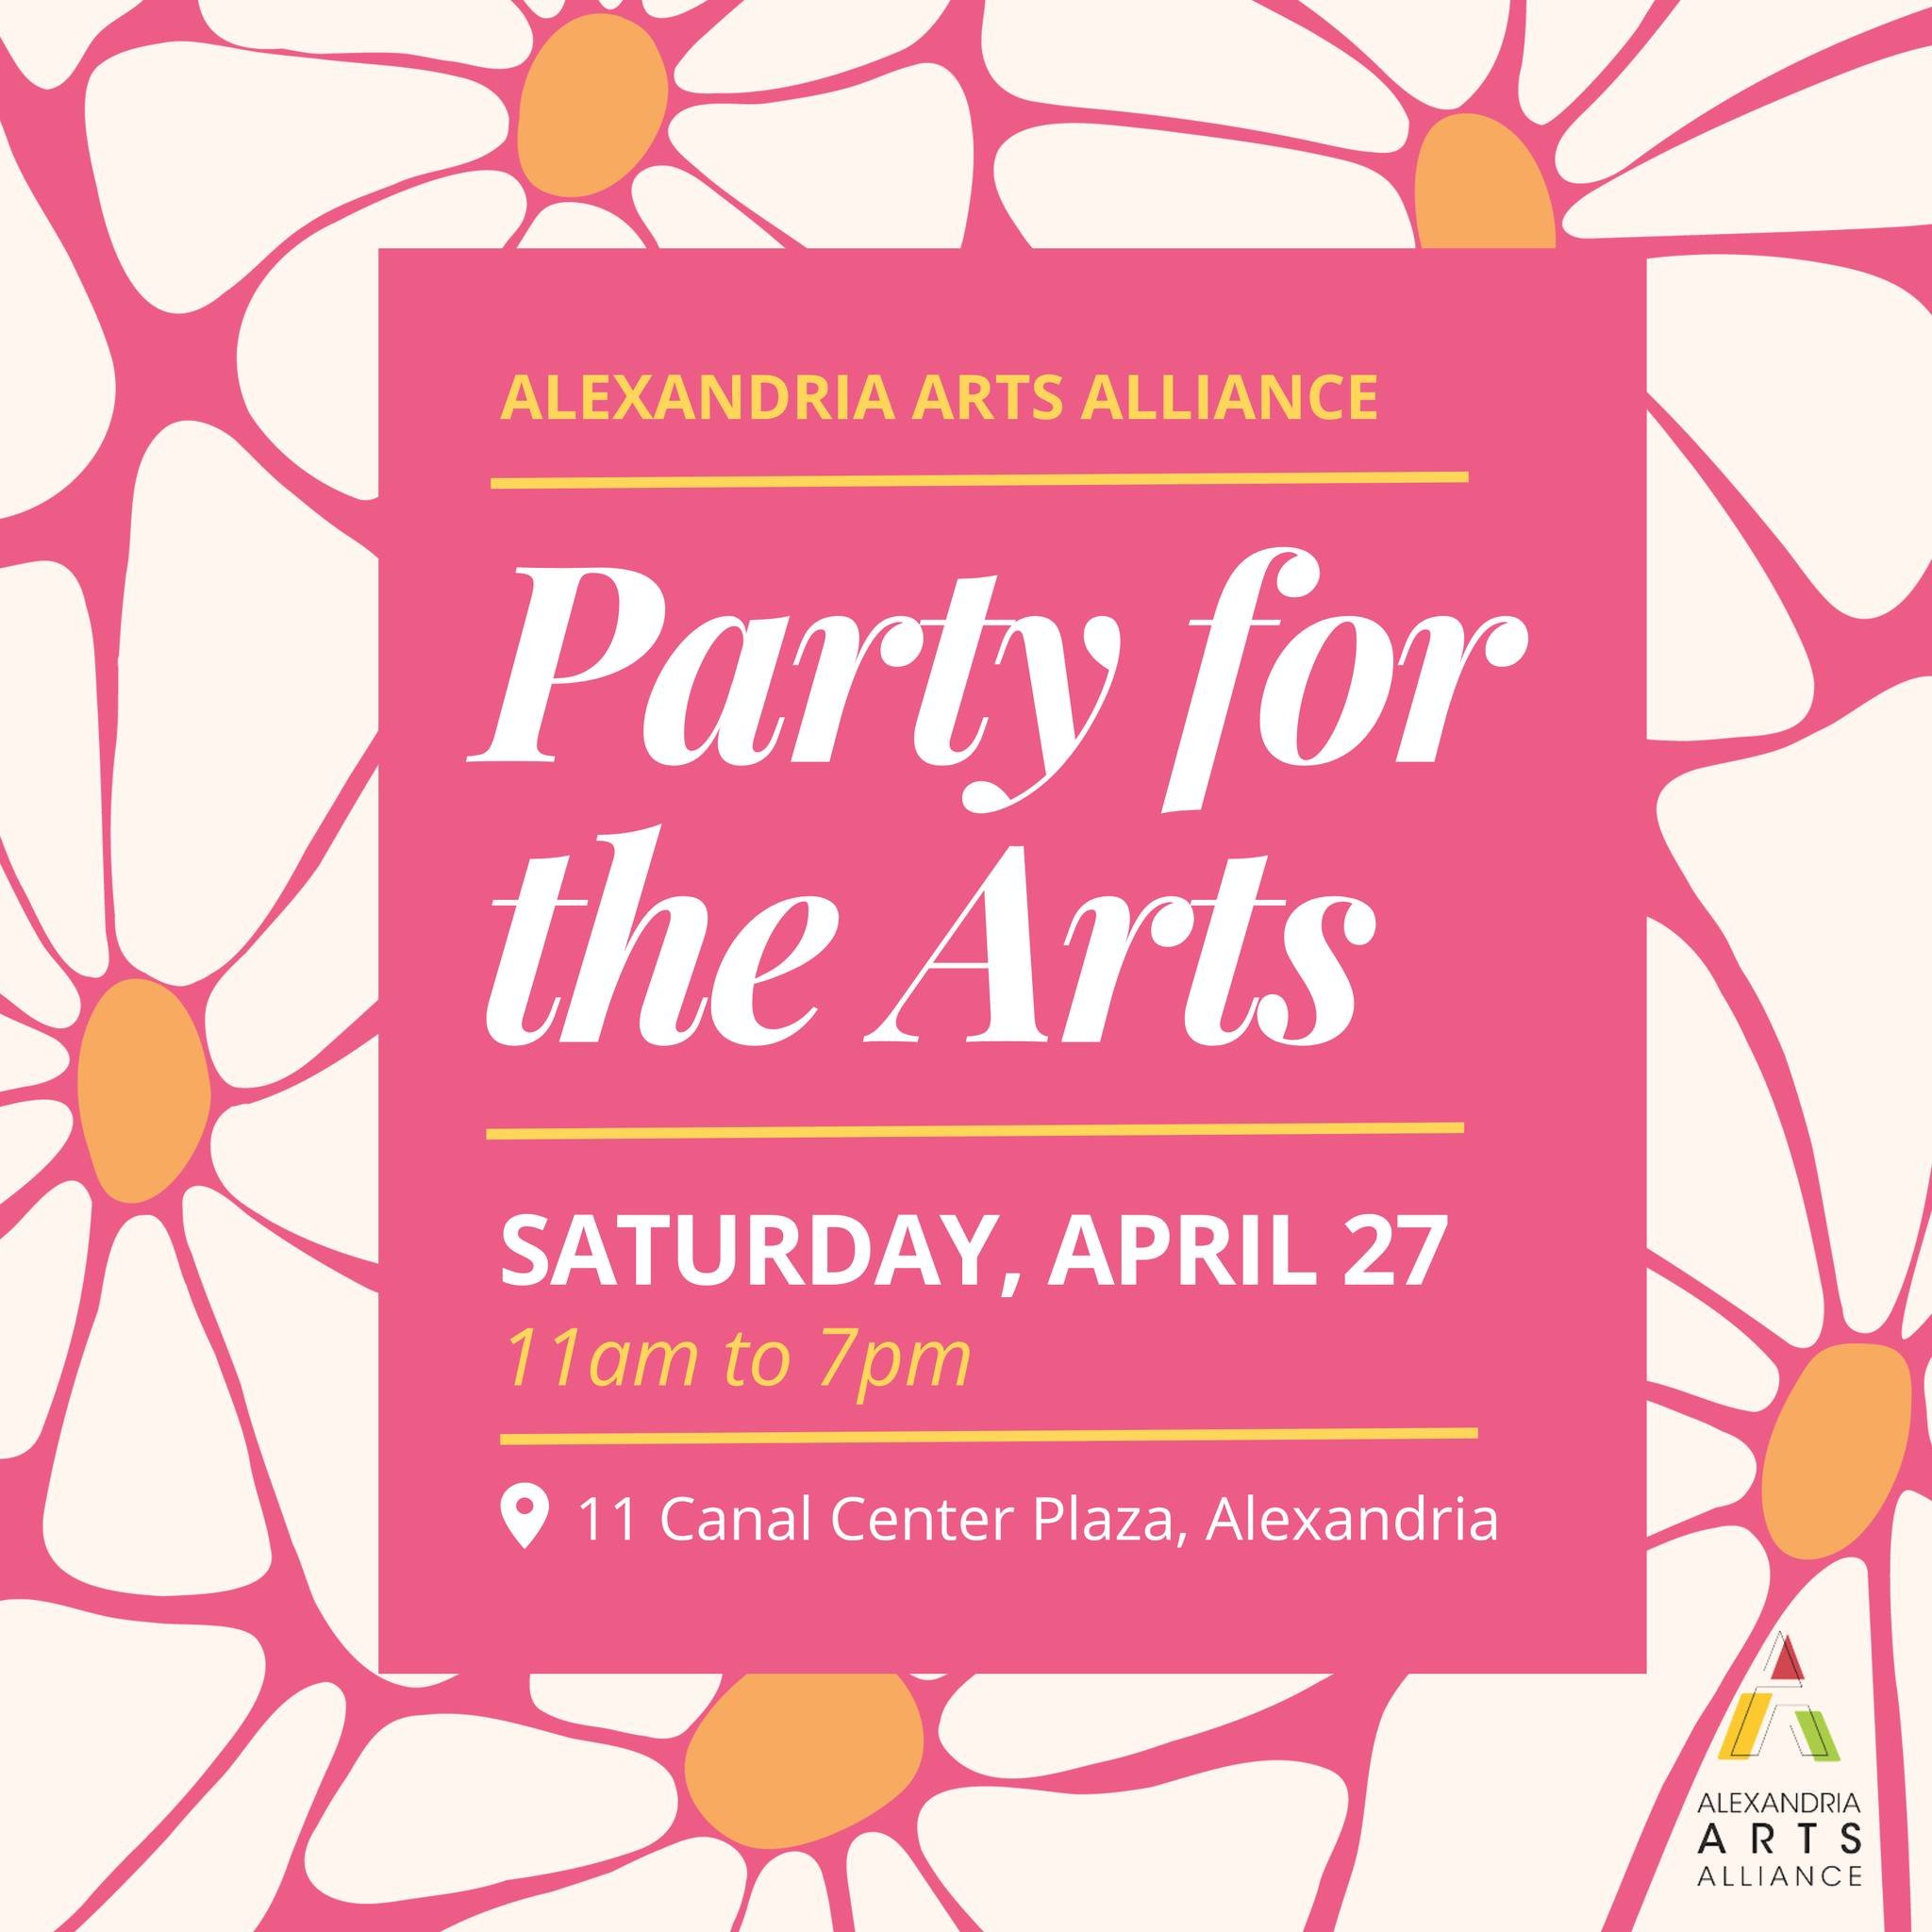 Party for the Arts is THIS SATURDAY at Canal Center Plaza (Old Town North Alexandria).
There is a lot happening and two stages for the performing groups. 
&bull; Over 40 artists and vendors (including me!)
&bull;Juried gallery show
&bull; Kids art ac